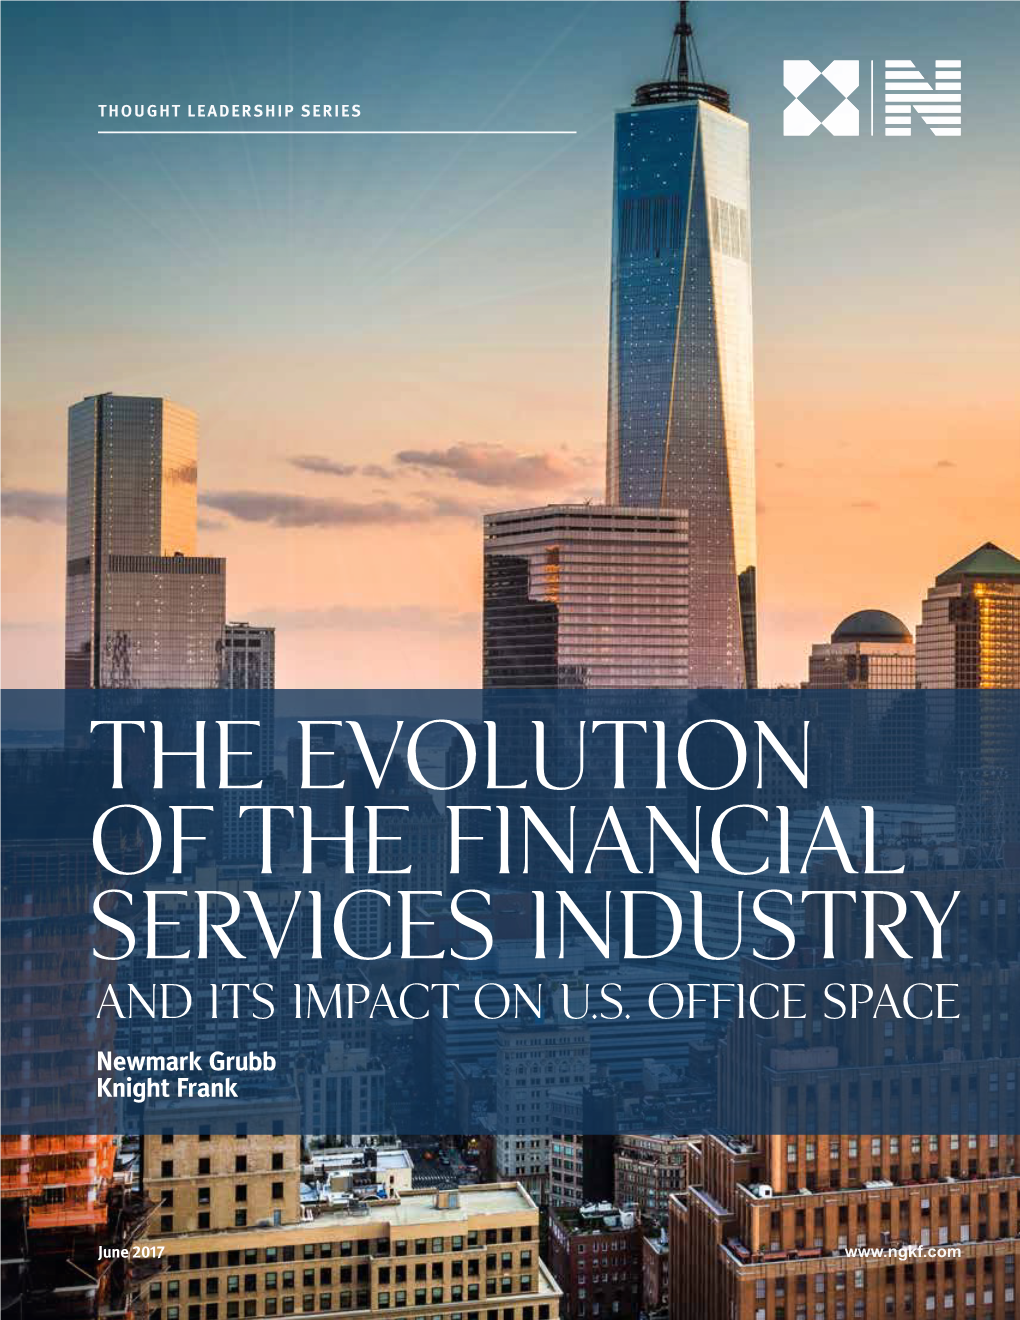 The Evolution of the Financial Services Industry and Its Impact on U.S